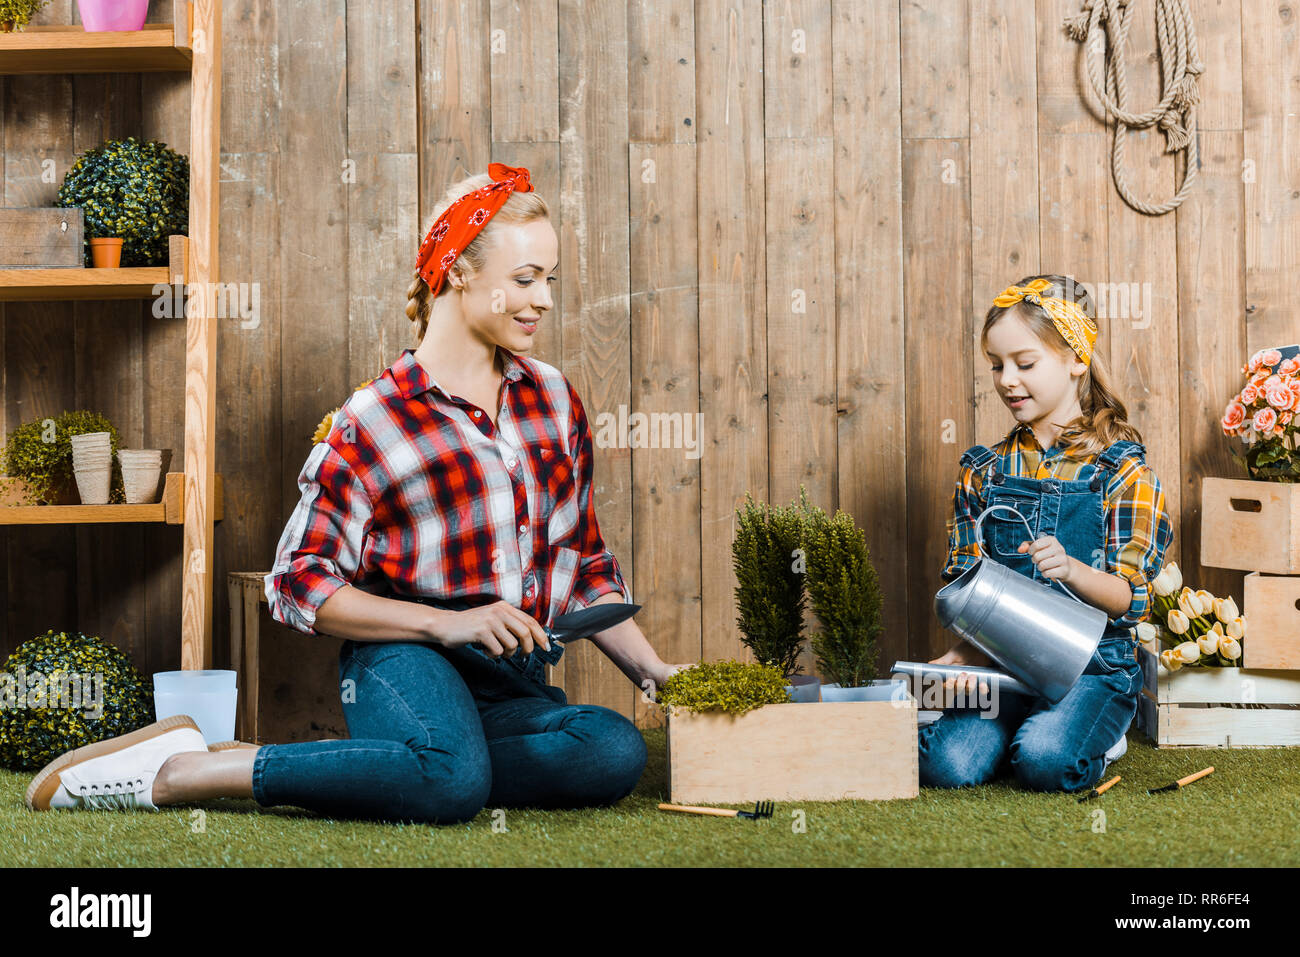 mother holding shovel near daughter watering plant while sitting on grass near wooden fence Stock Photo